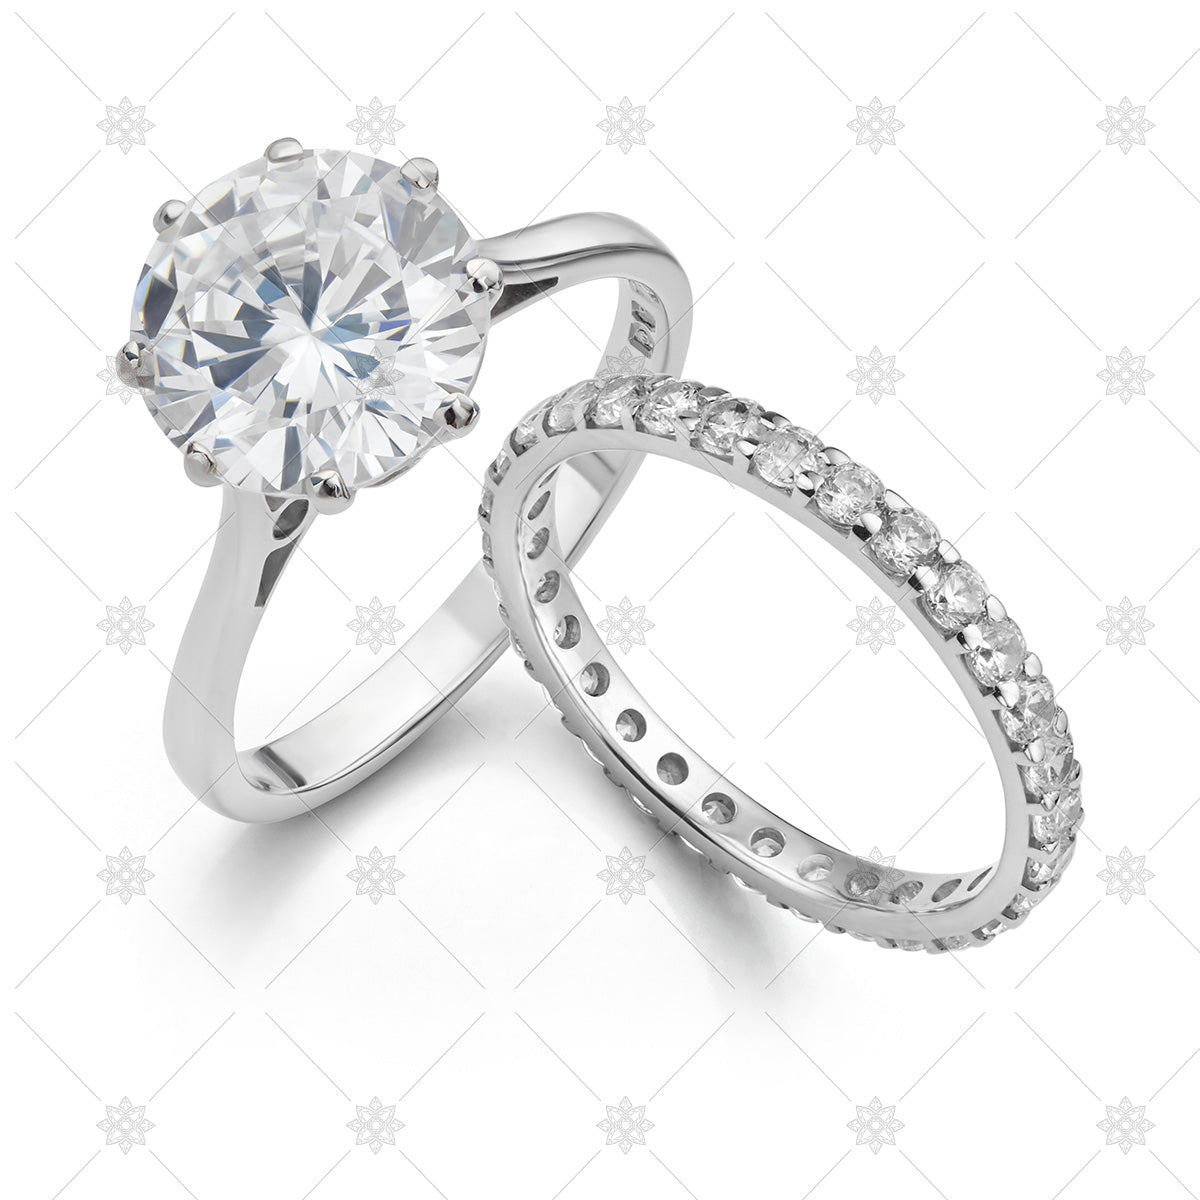 Jewellery stock photograph of a diamond solitaire engagement ring with a fully set diamond wedding ring isolated on a white background